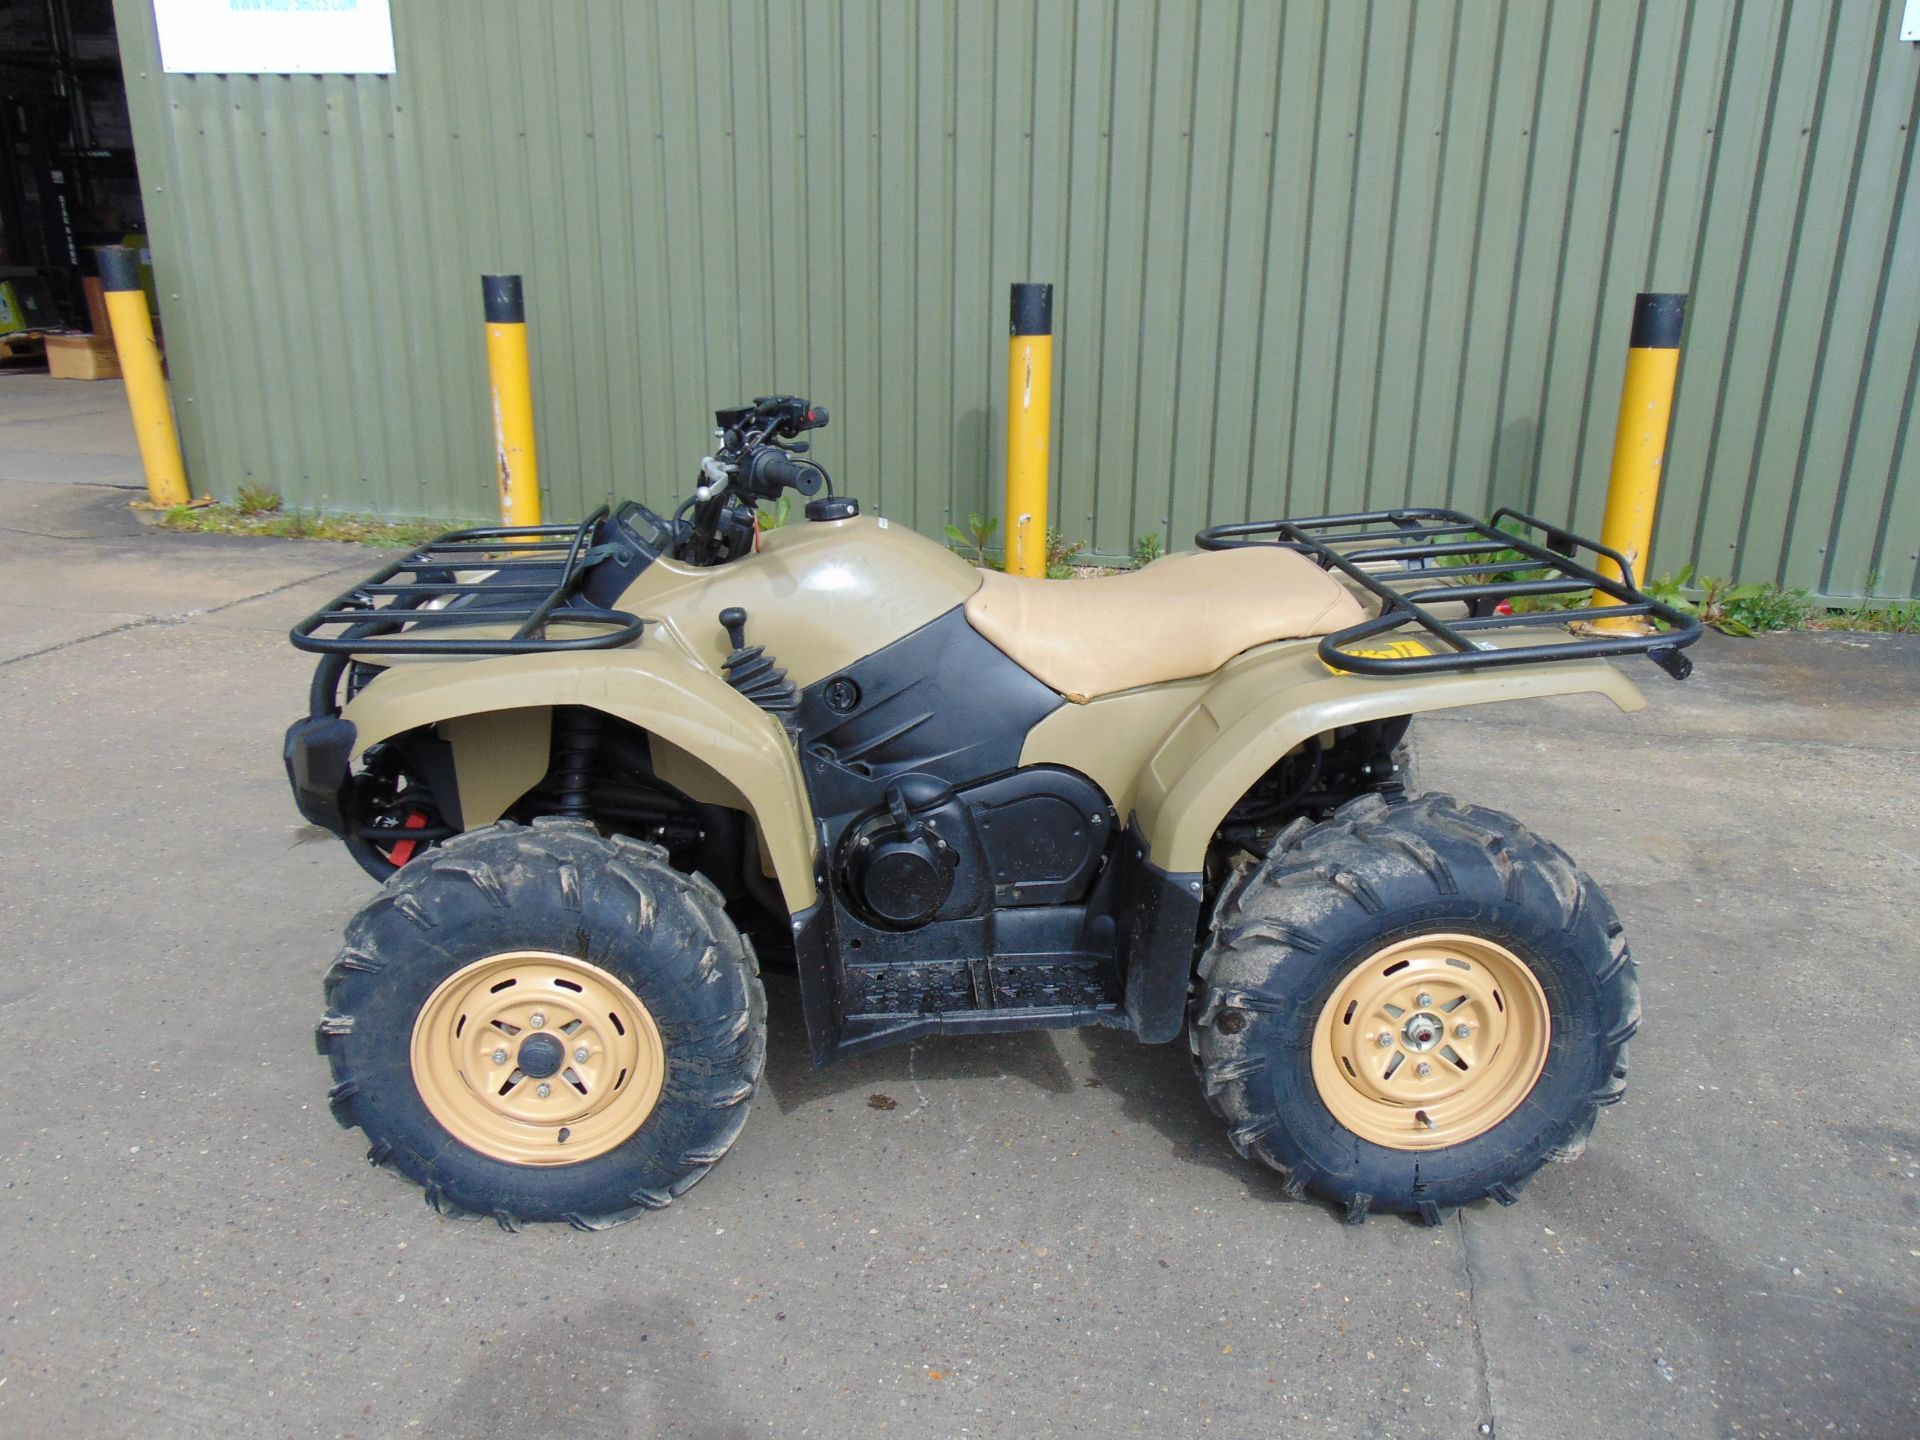 Yamaha Grizzly 450 4 x 4 ATV Quad Bike 584 hours only from MOD - Image 21 of 30